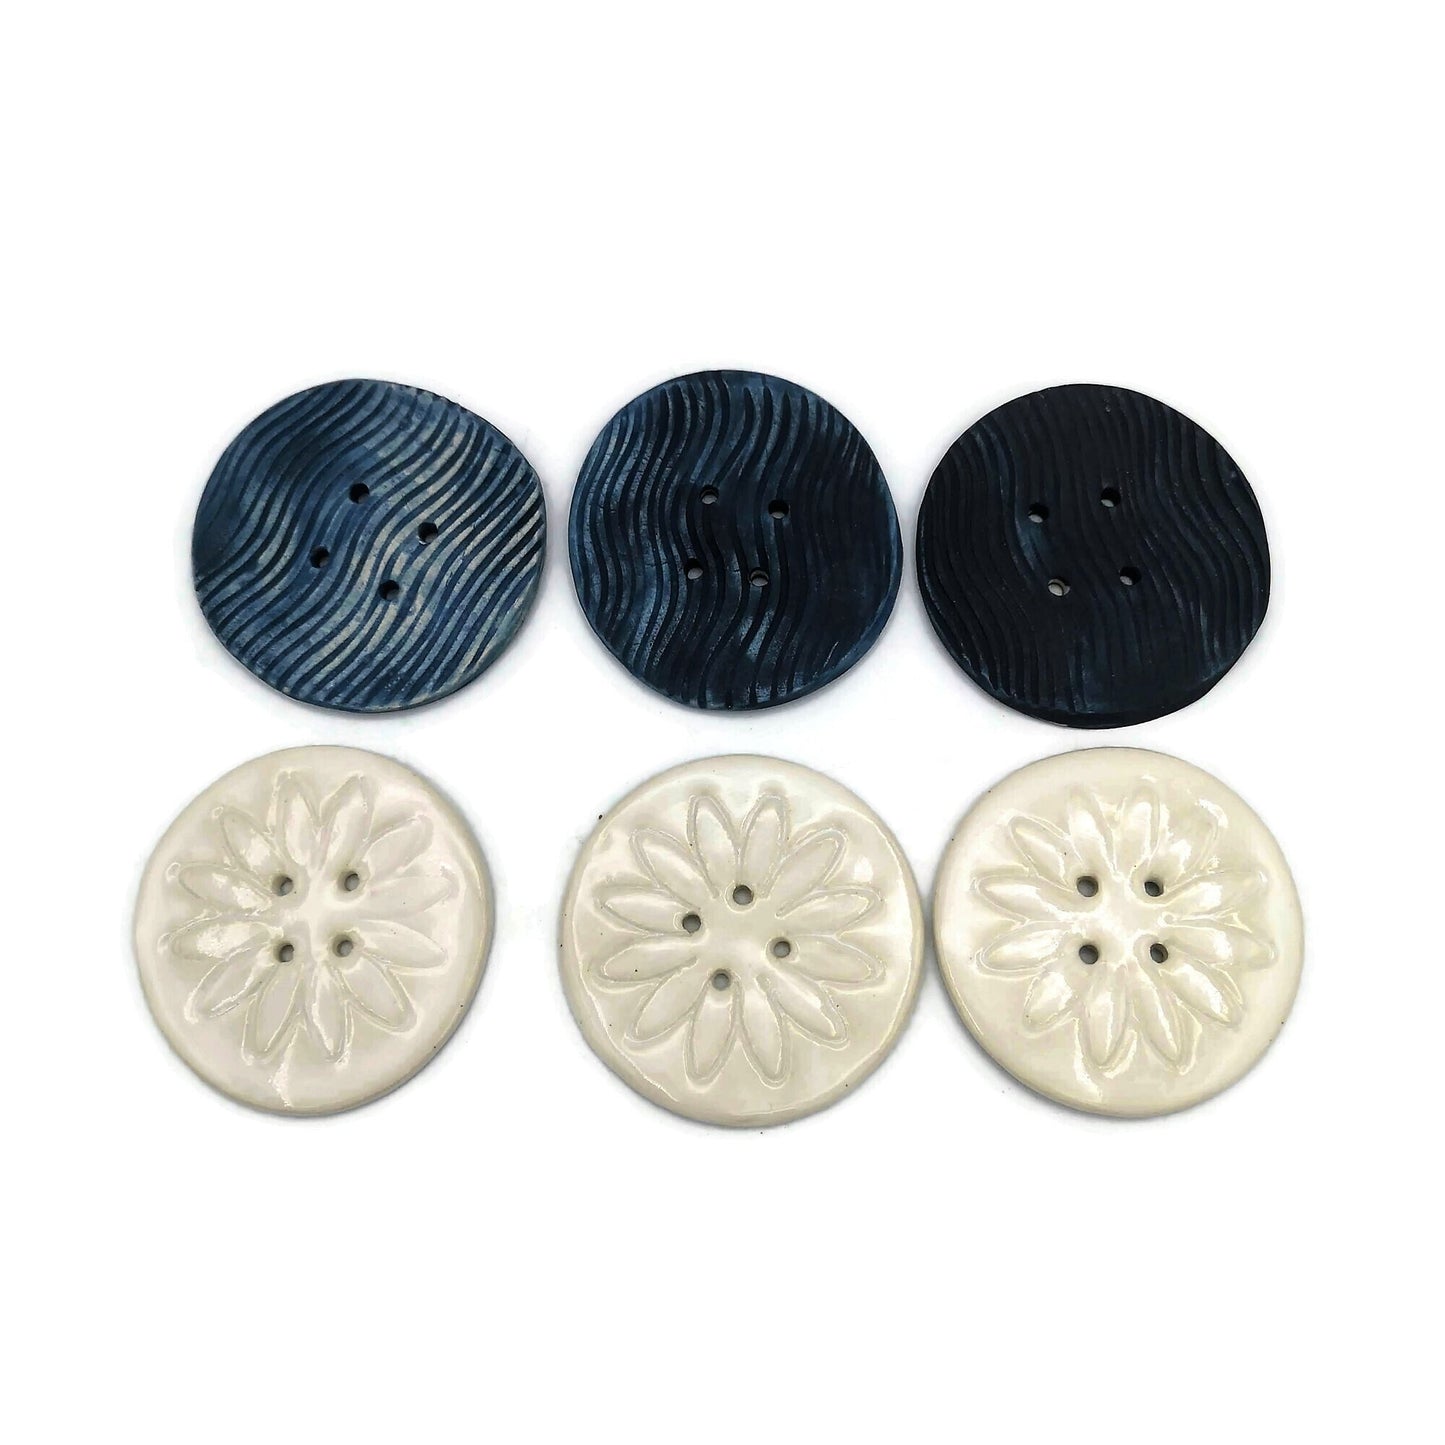 6Pc 65mm Giant Sewing Buttons, Handmade Ceramic Coat Buttons With Flower And Waves Design, Decorative Novelty Buttons for Crafts Extra Large - Ceramica Ana Rafael